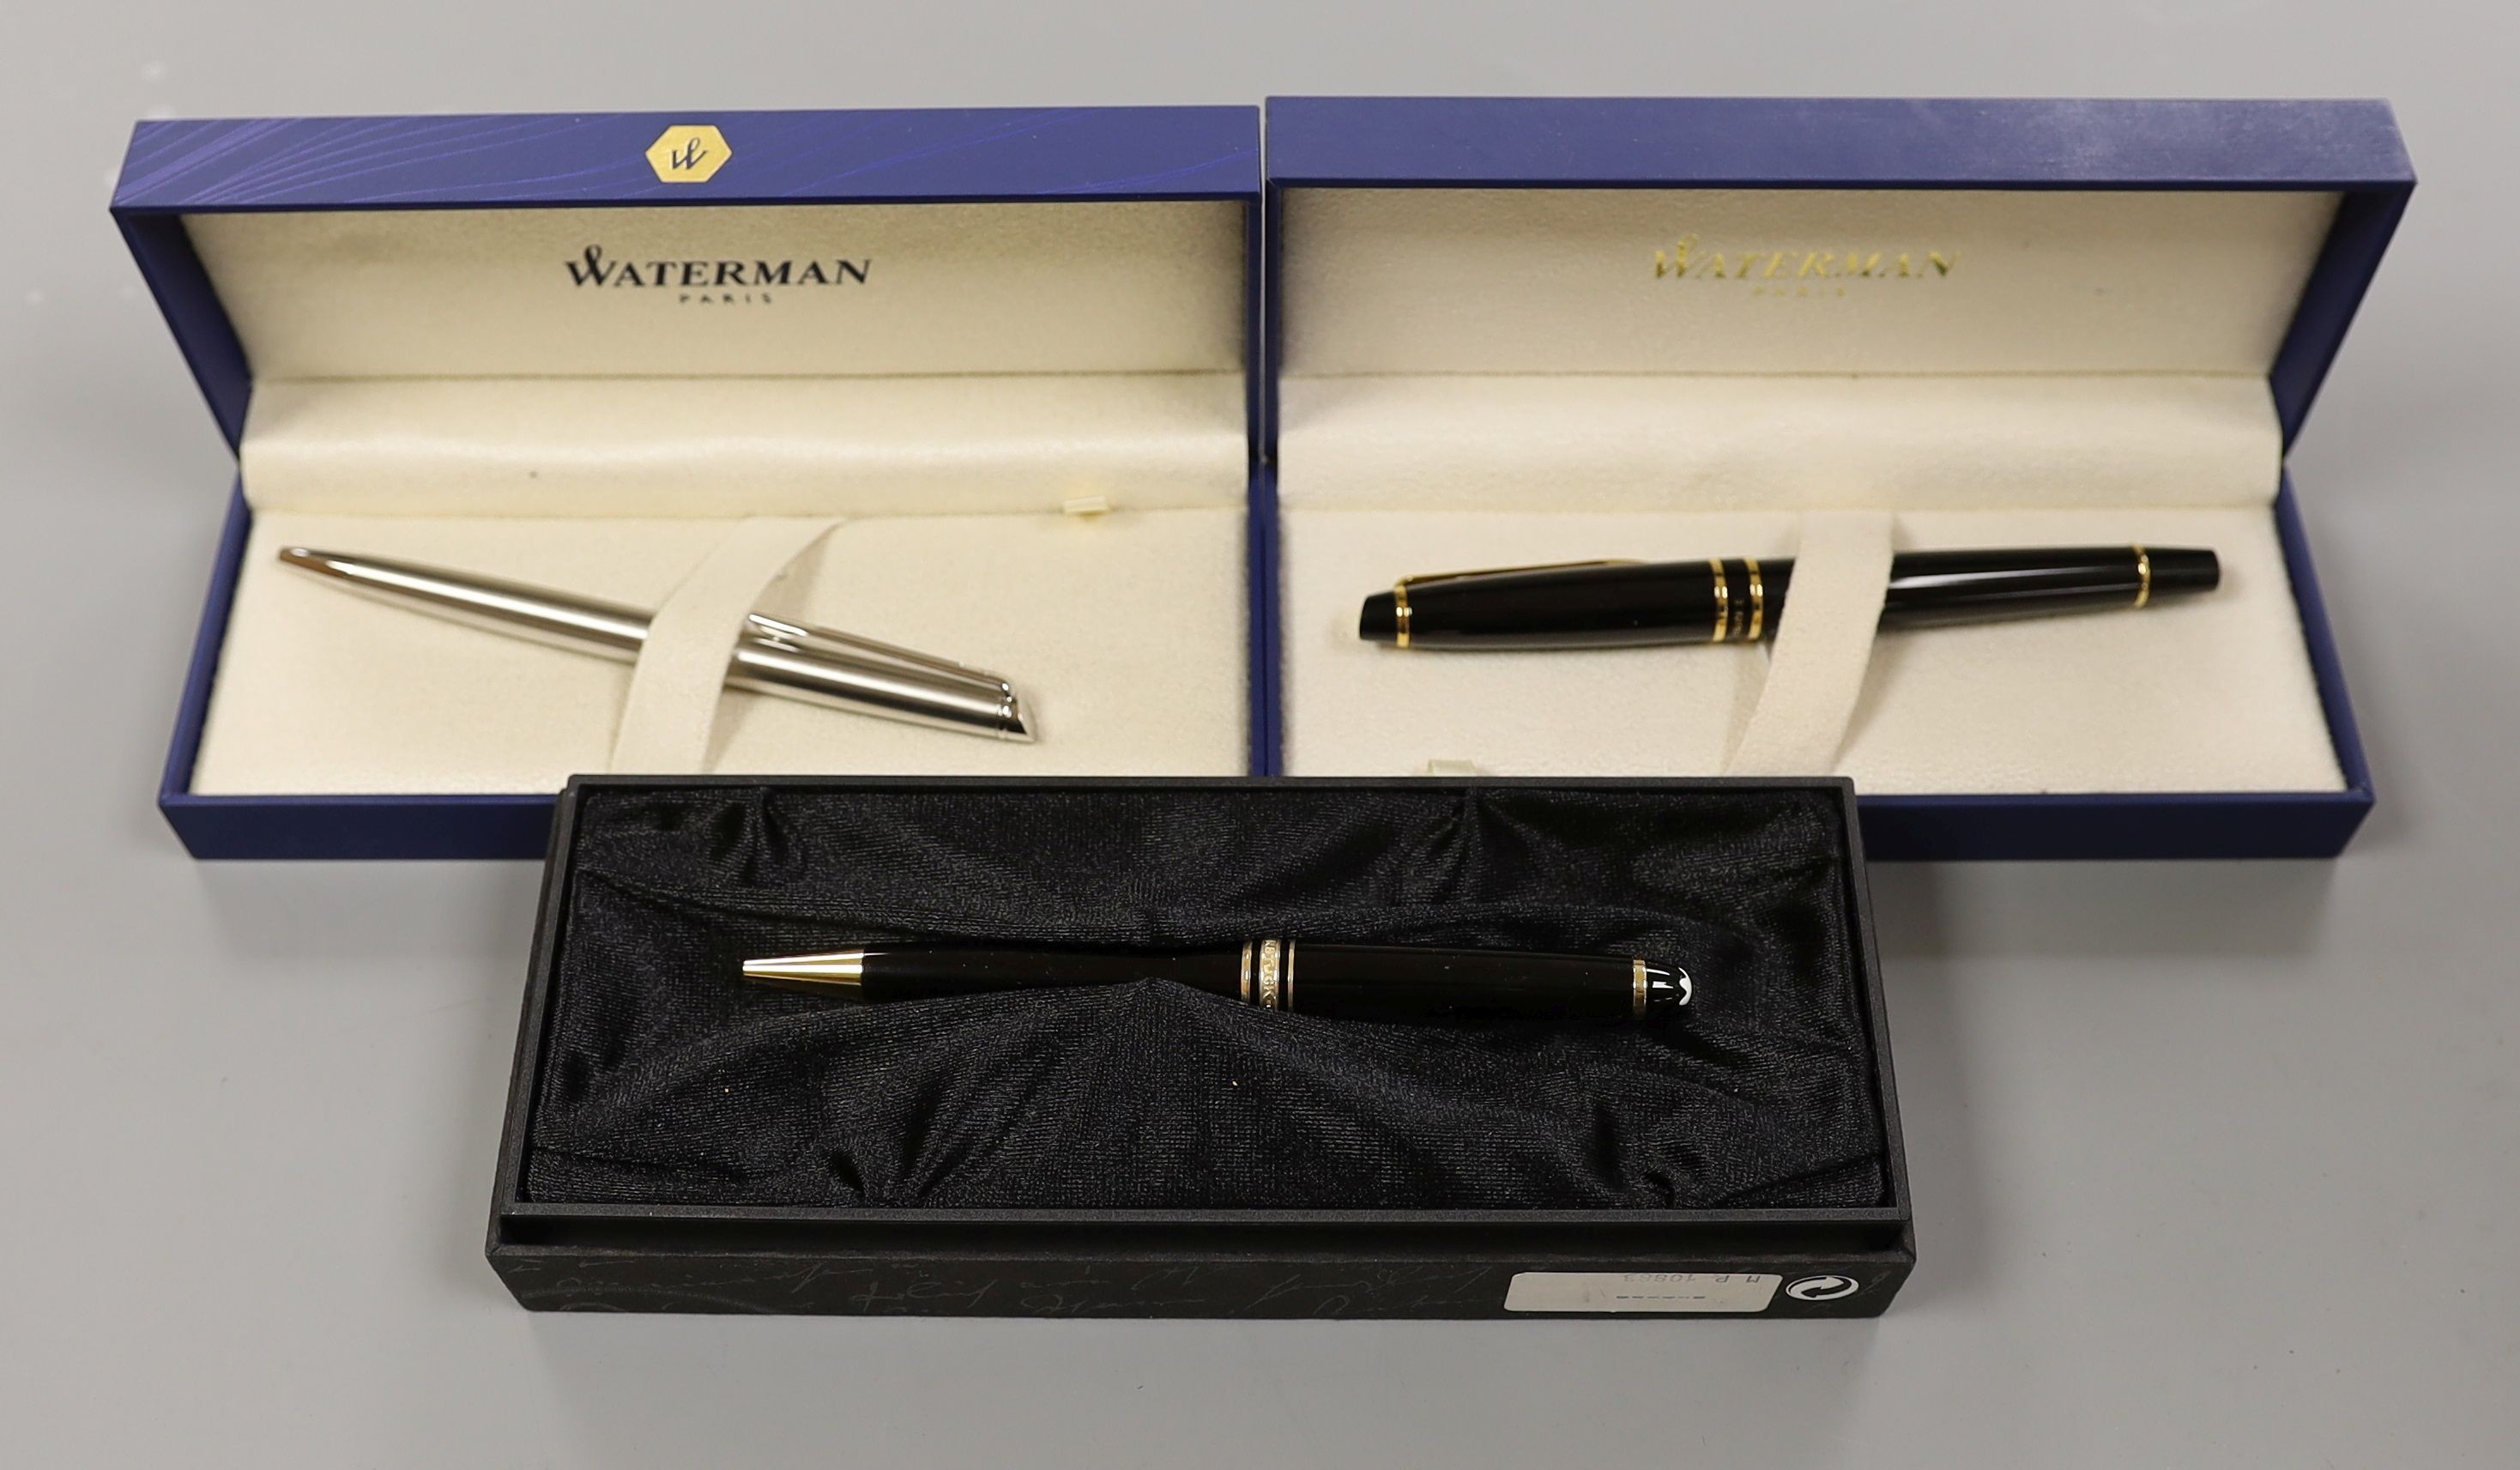 A Waterman fountain pen and ballpoint pen and a Mont Blanc Meisterstuck pen, all cased